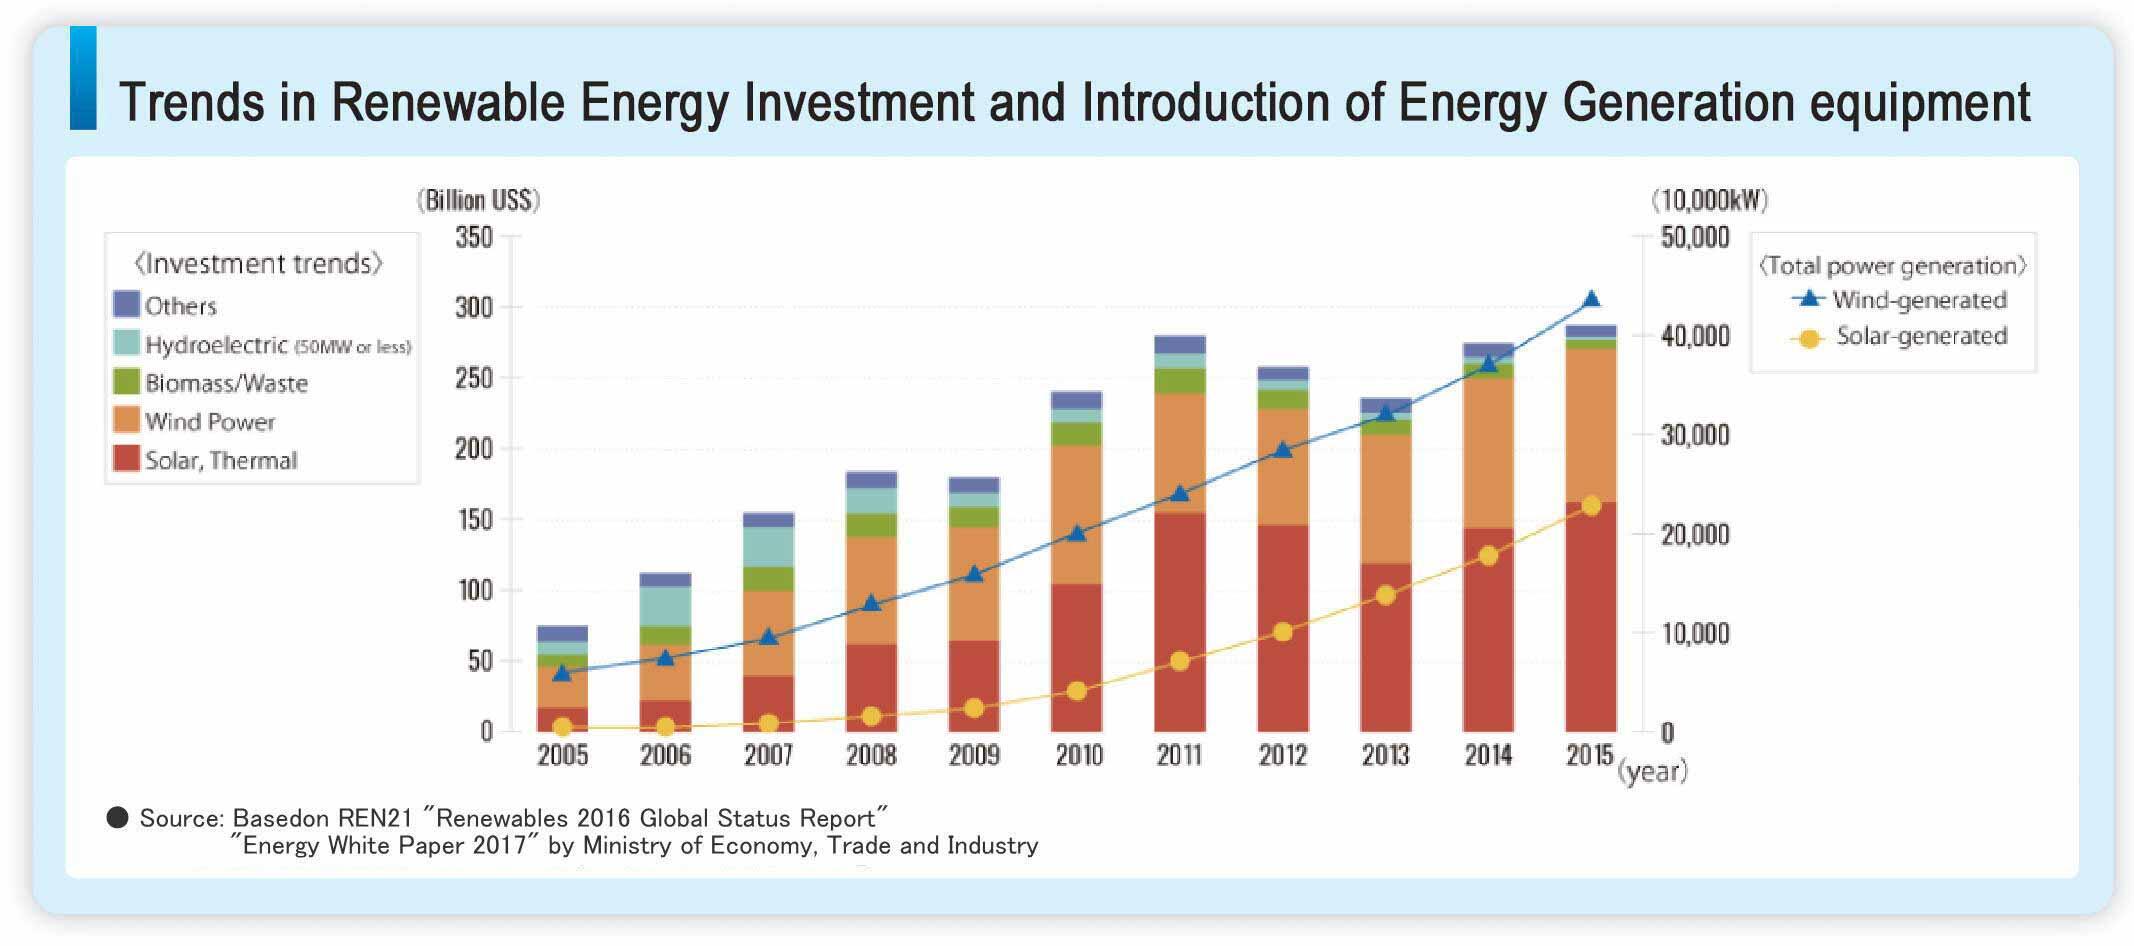 Trends in Renewable Energy Investment and Introduction of Energy Generation equipment